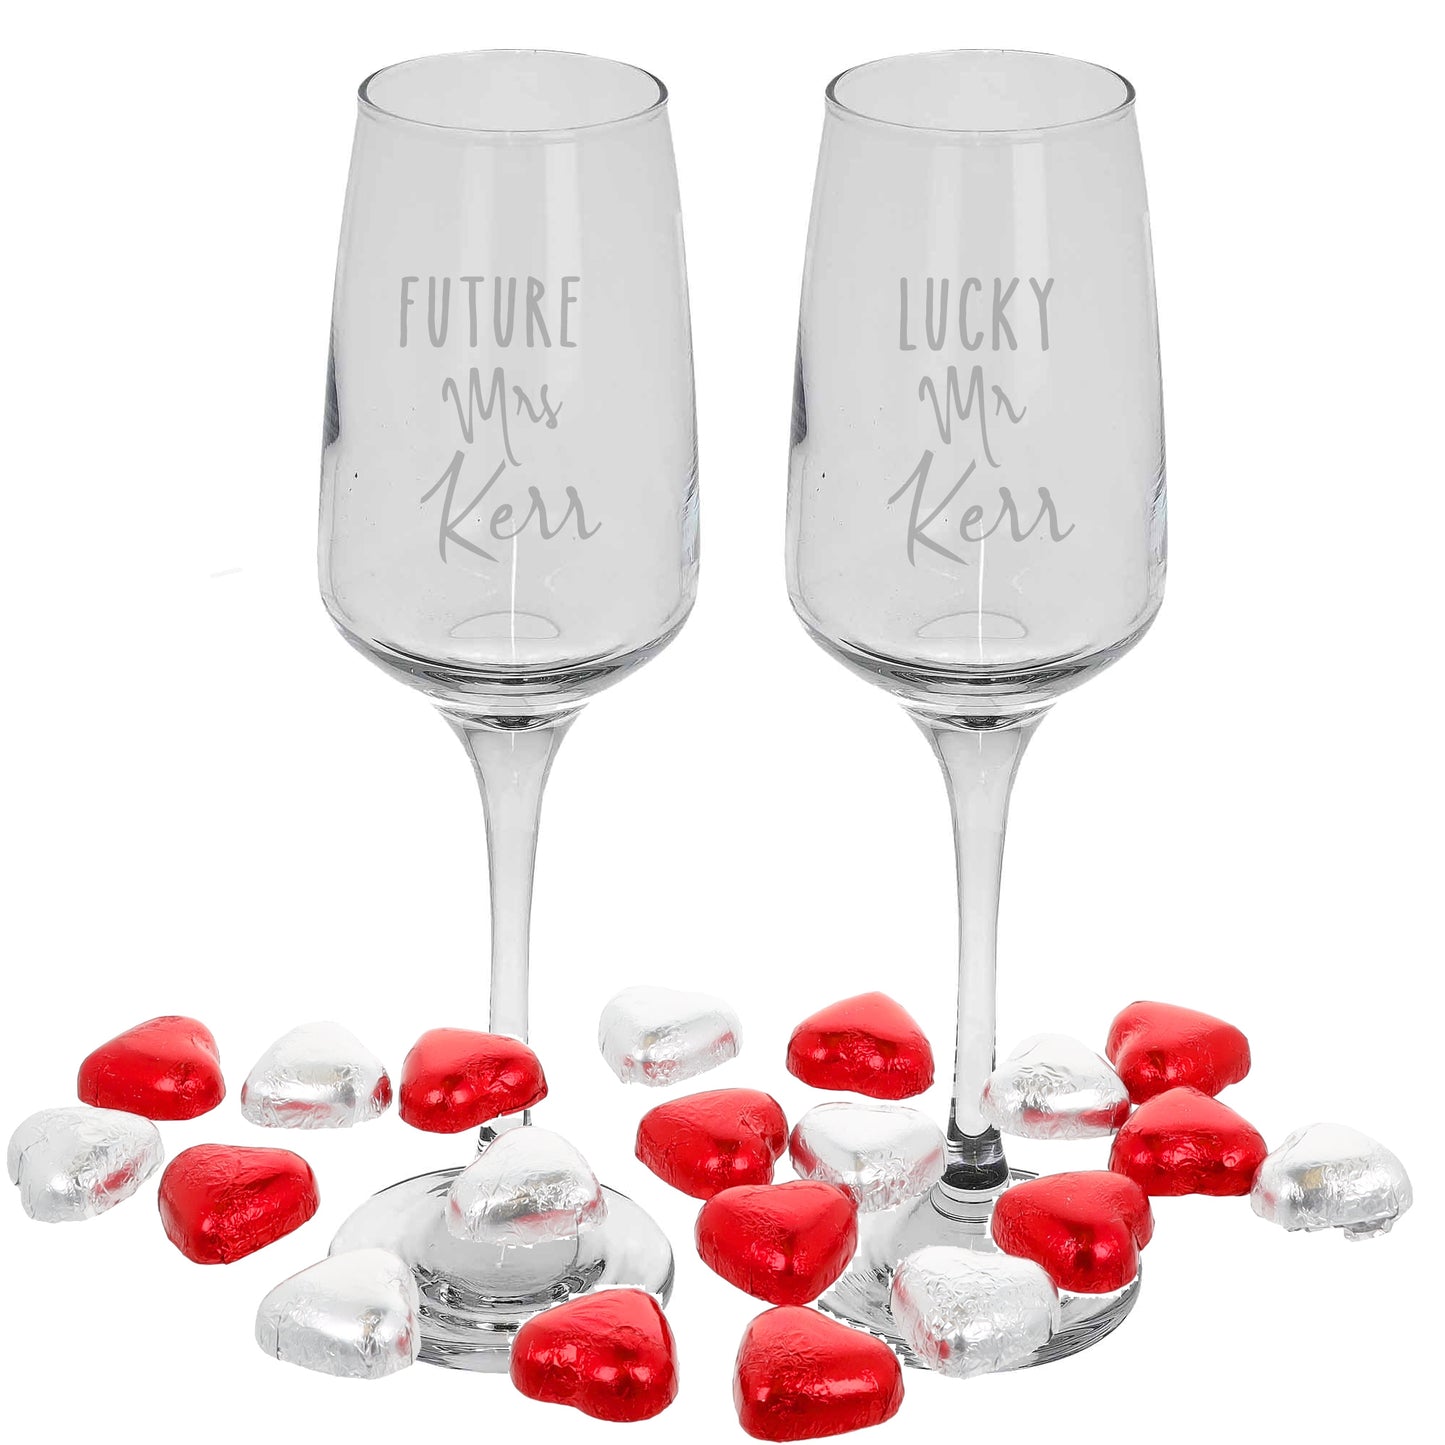 Personalised Engraved Future Mrs/Lucky Mr Champagne Glass Set  - Always Looking Good -   